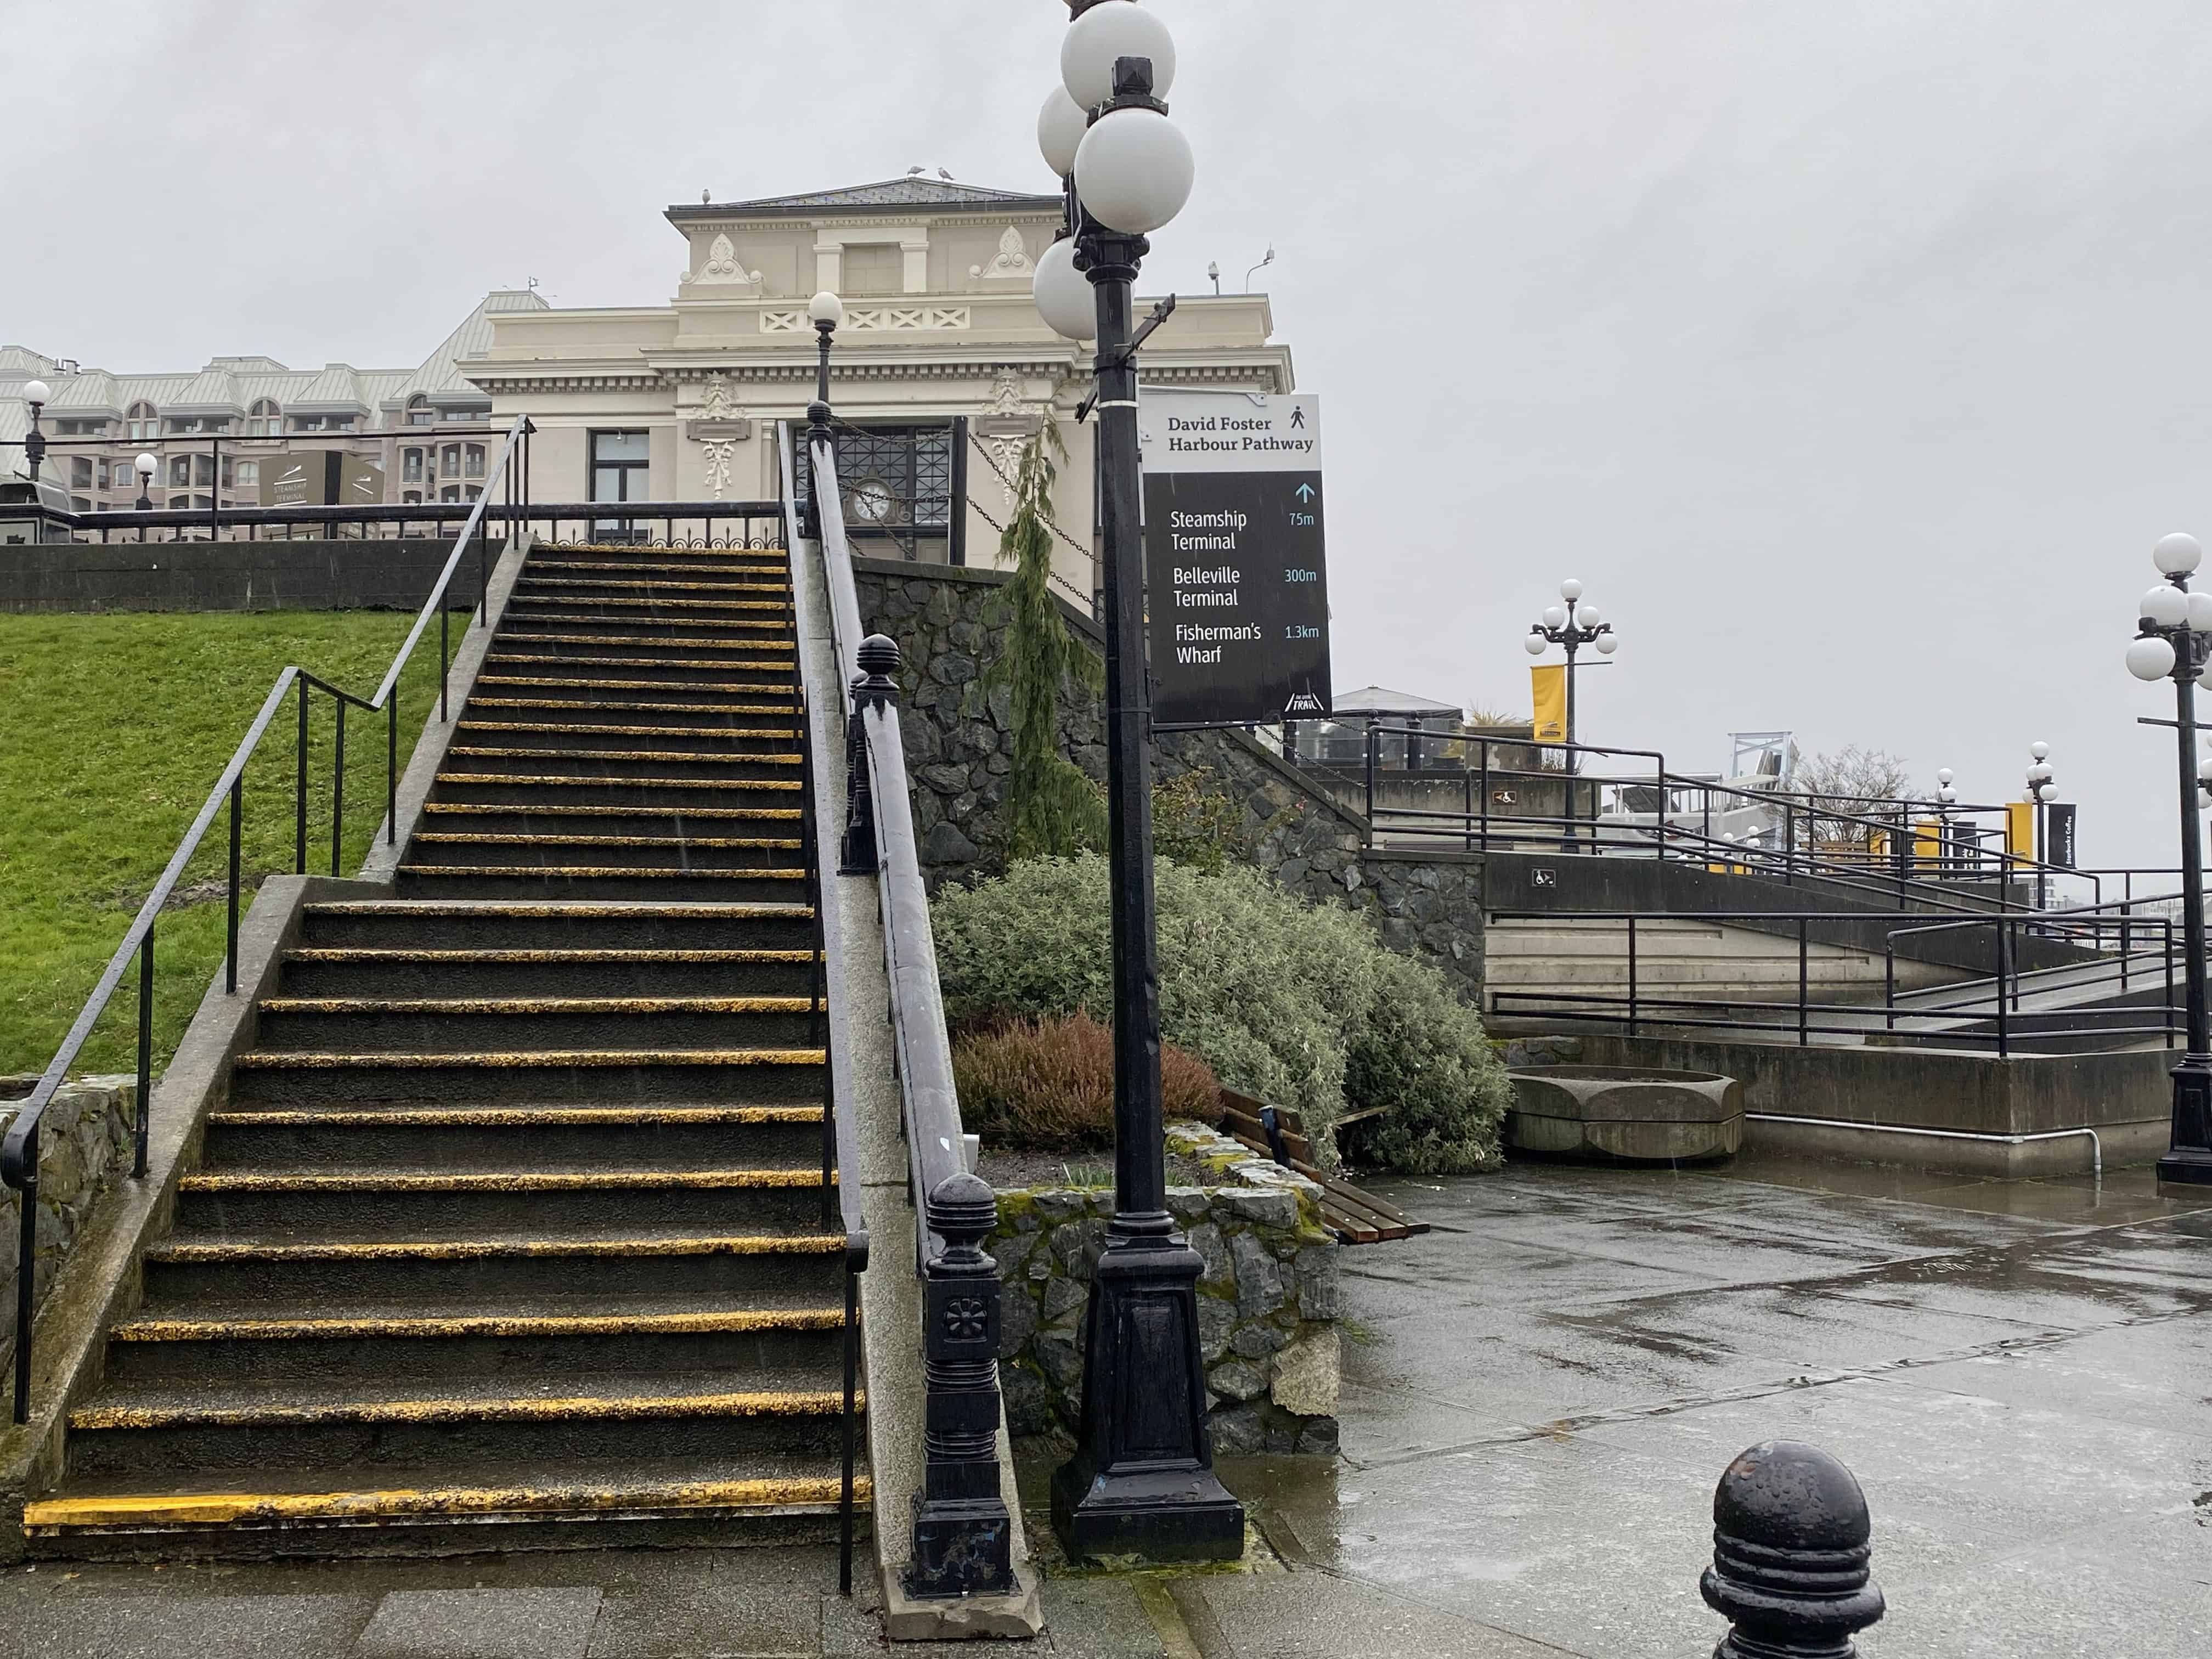 These stairs lead up to the street level.  Stay right to remain on David Foster Harbour Walkway.